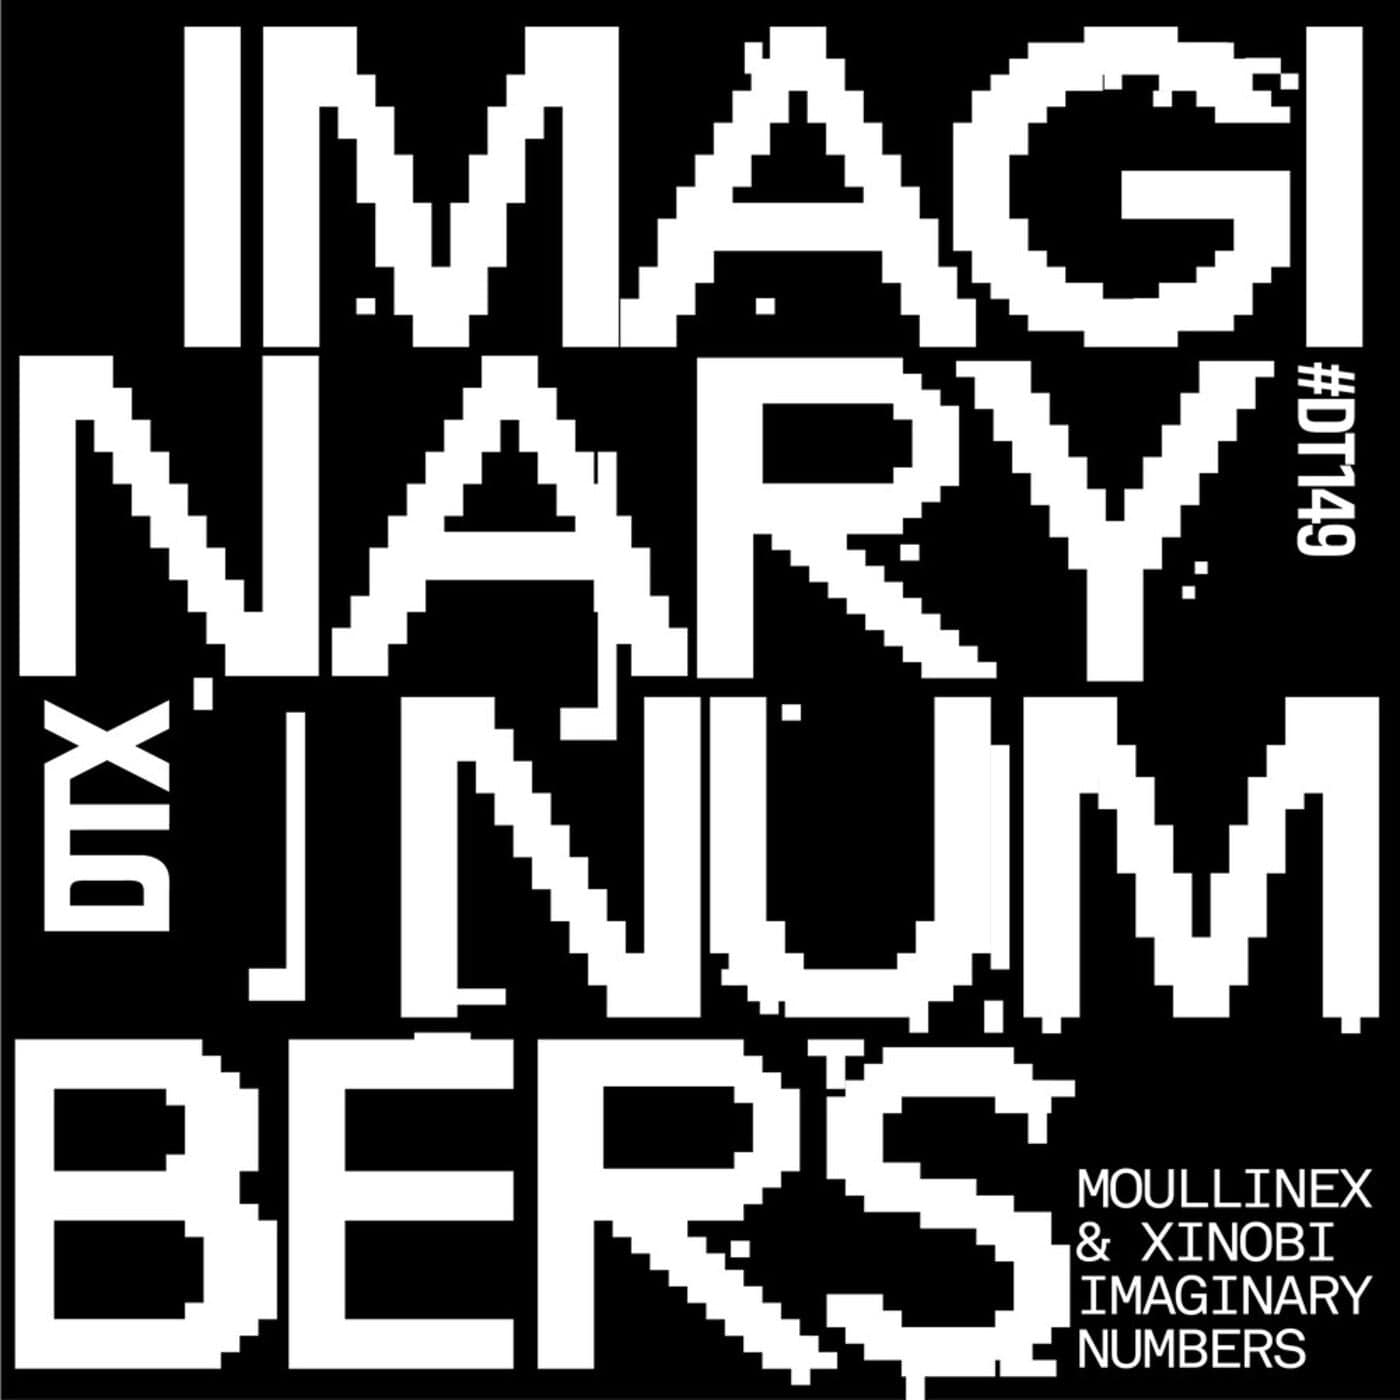 Download Imaginary Numbers on Electrobuzz